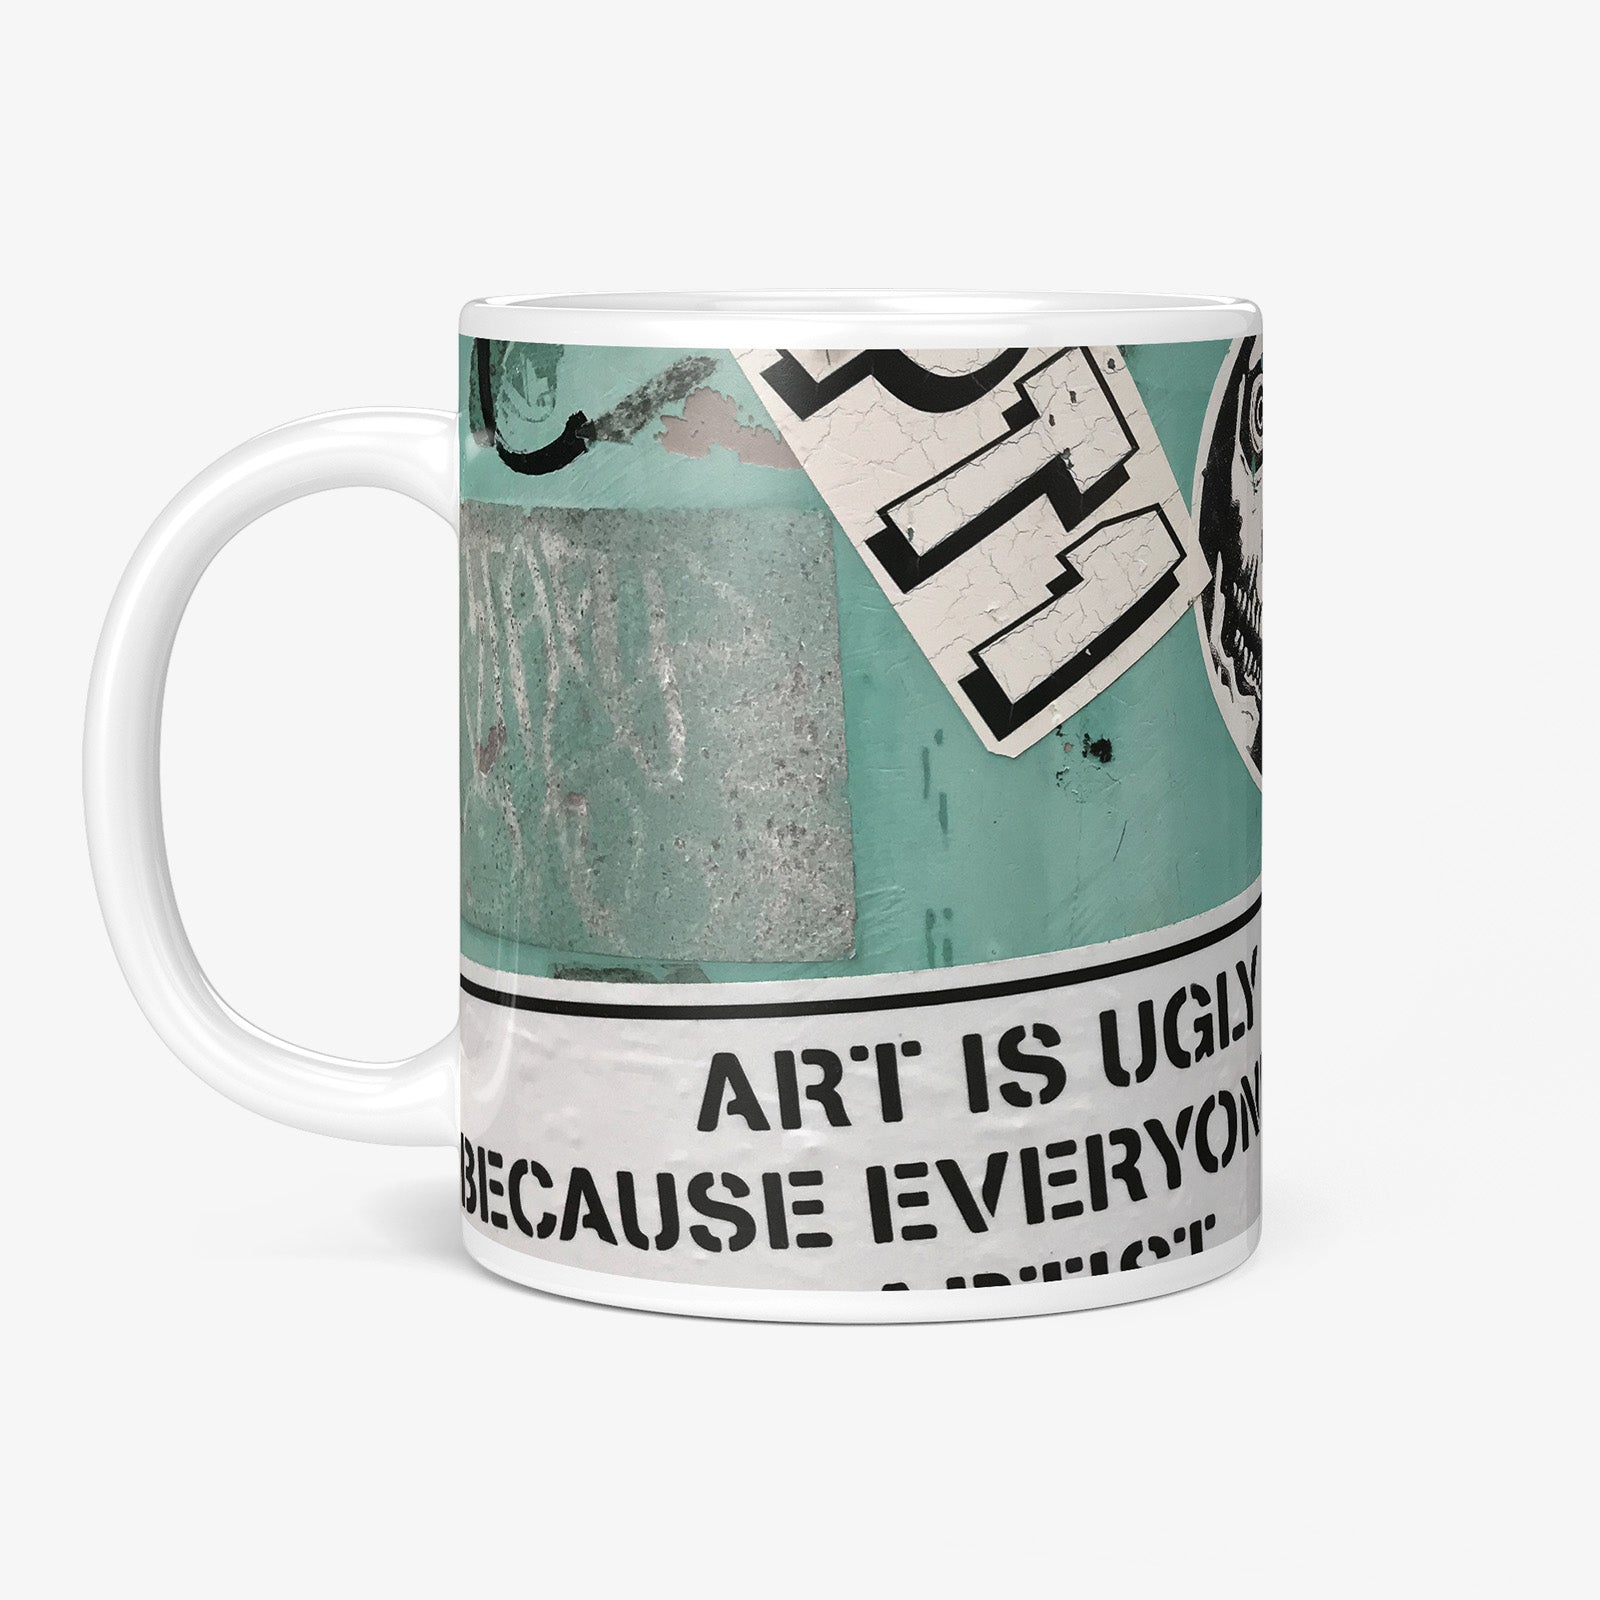 Be inspired by our Urban Art Coffee Mug "Art Is Ugly" from Bangkok. This mug features an 11oz size with the handle on the left.